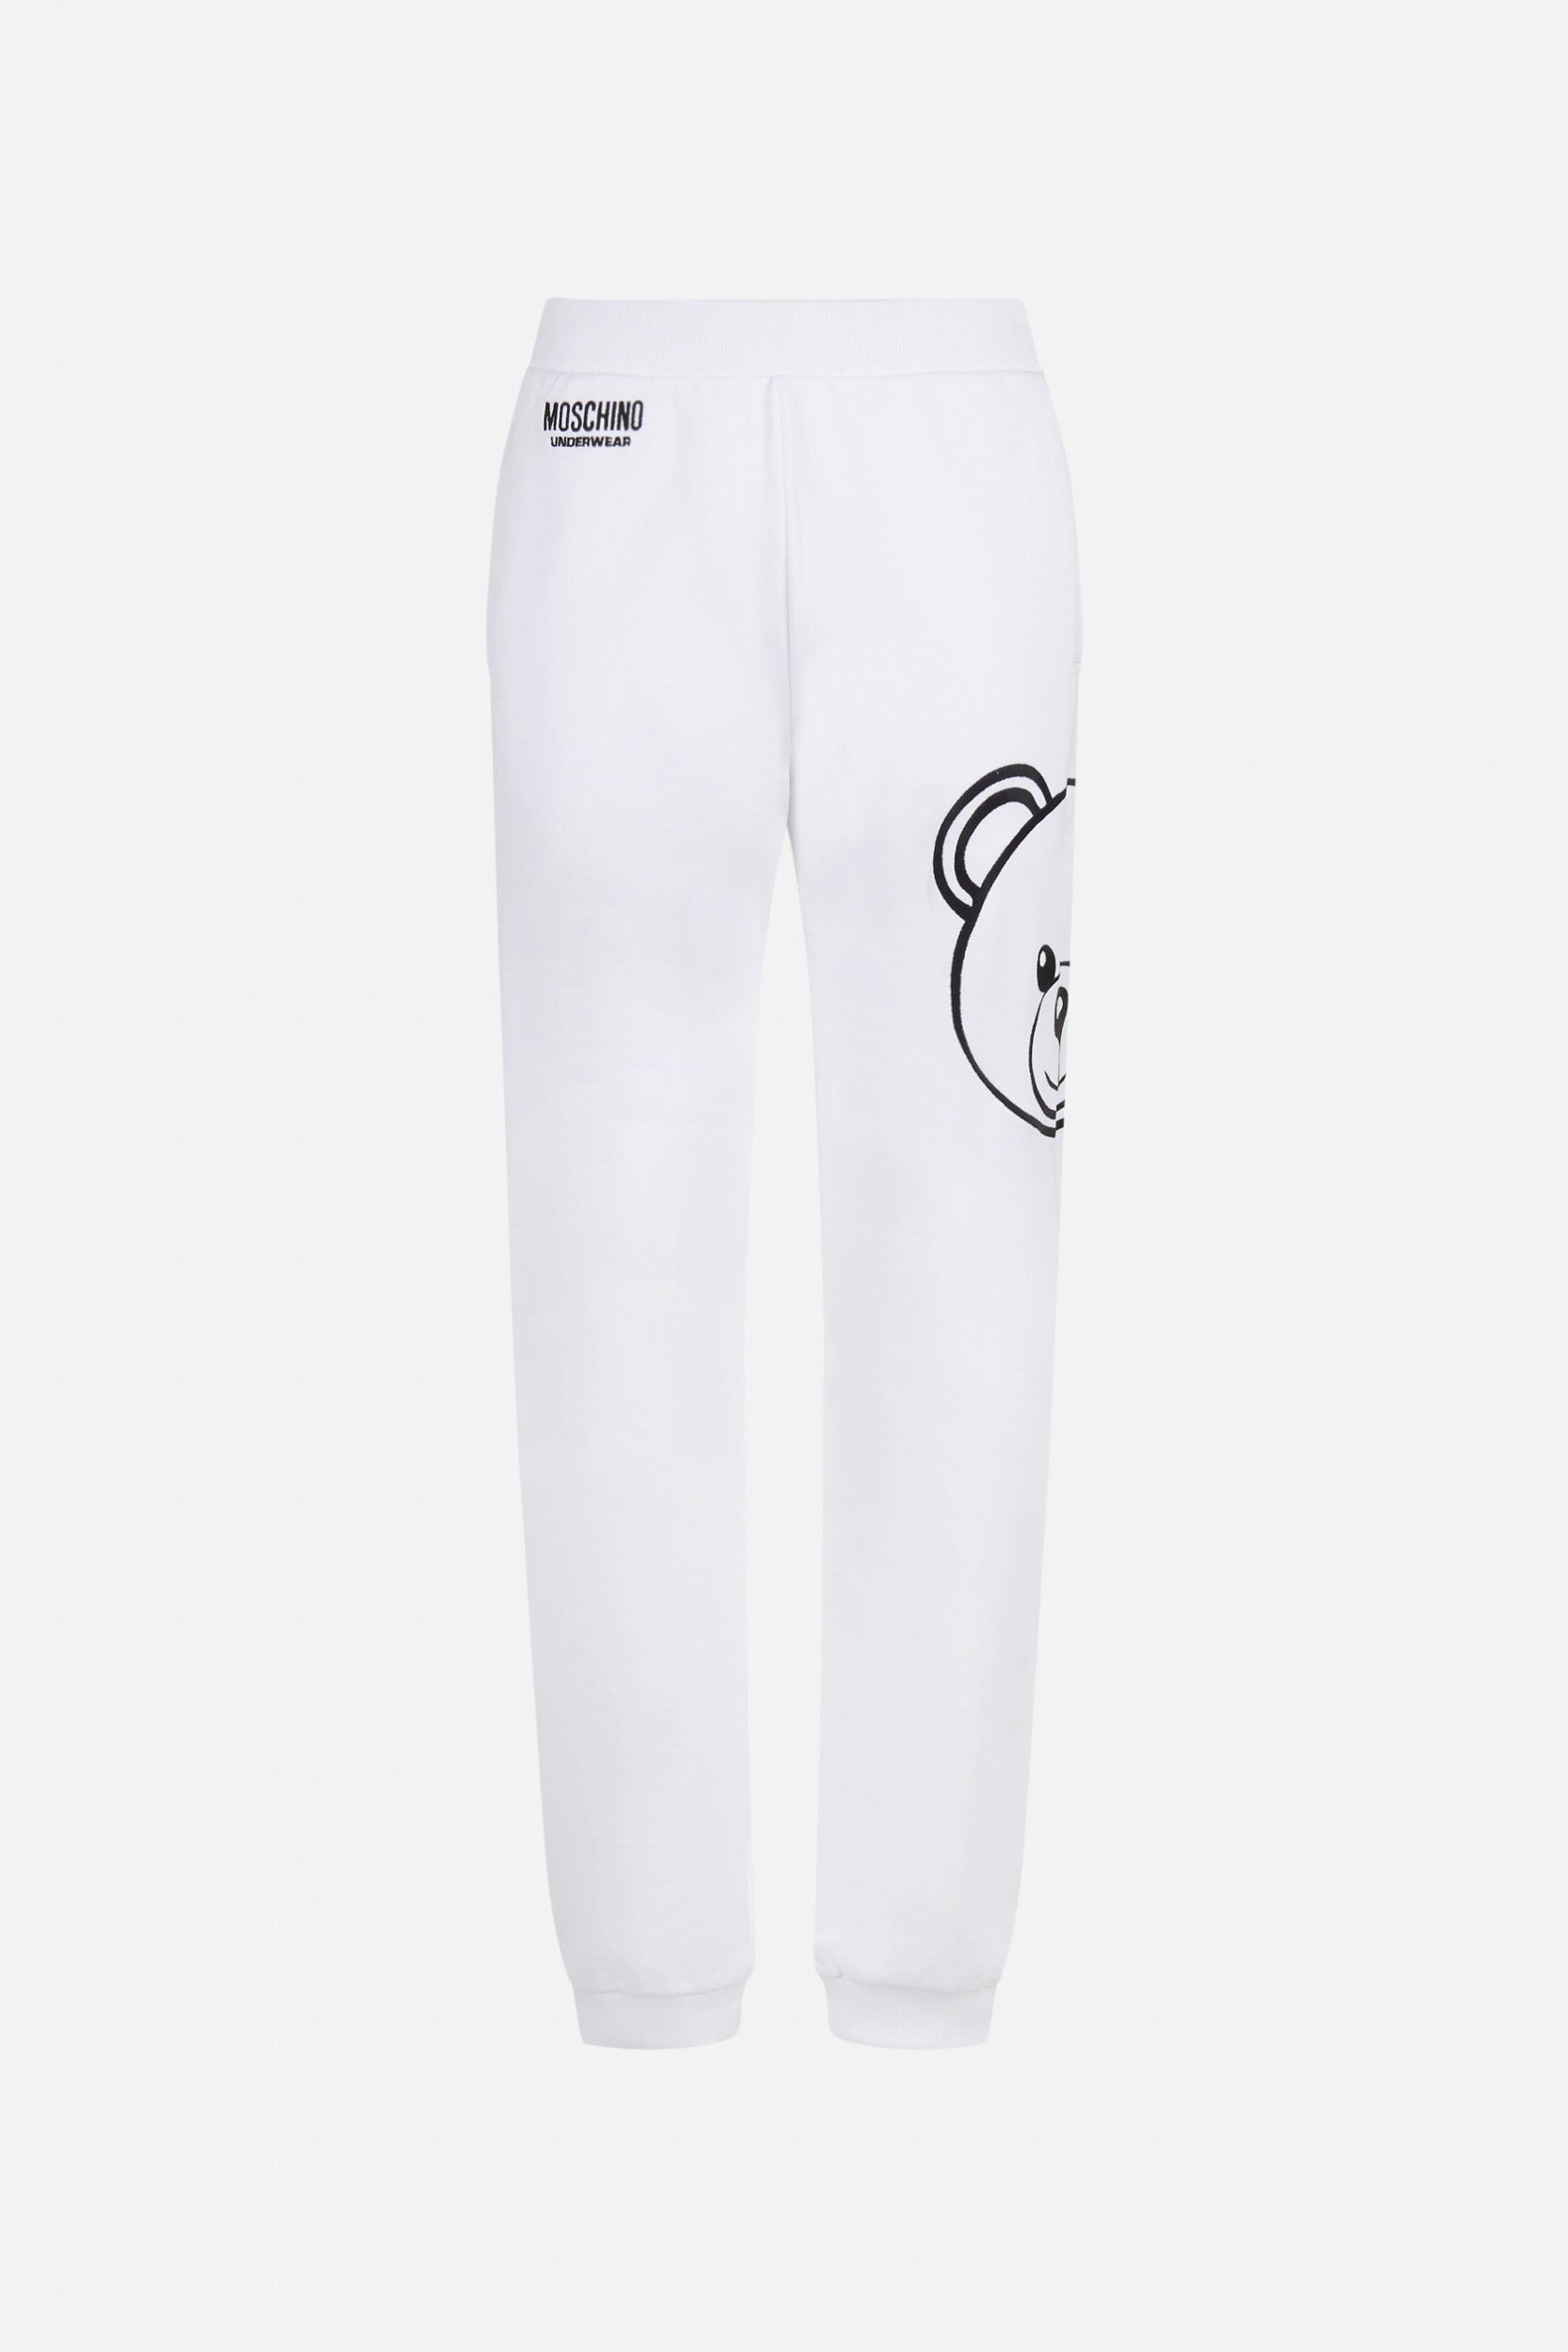 Moschino White Tracksuit Pants